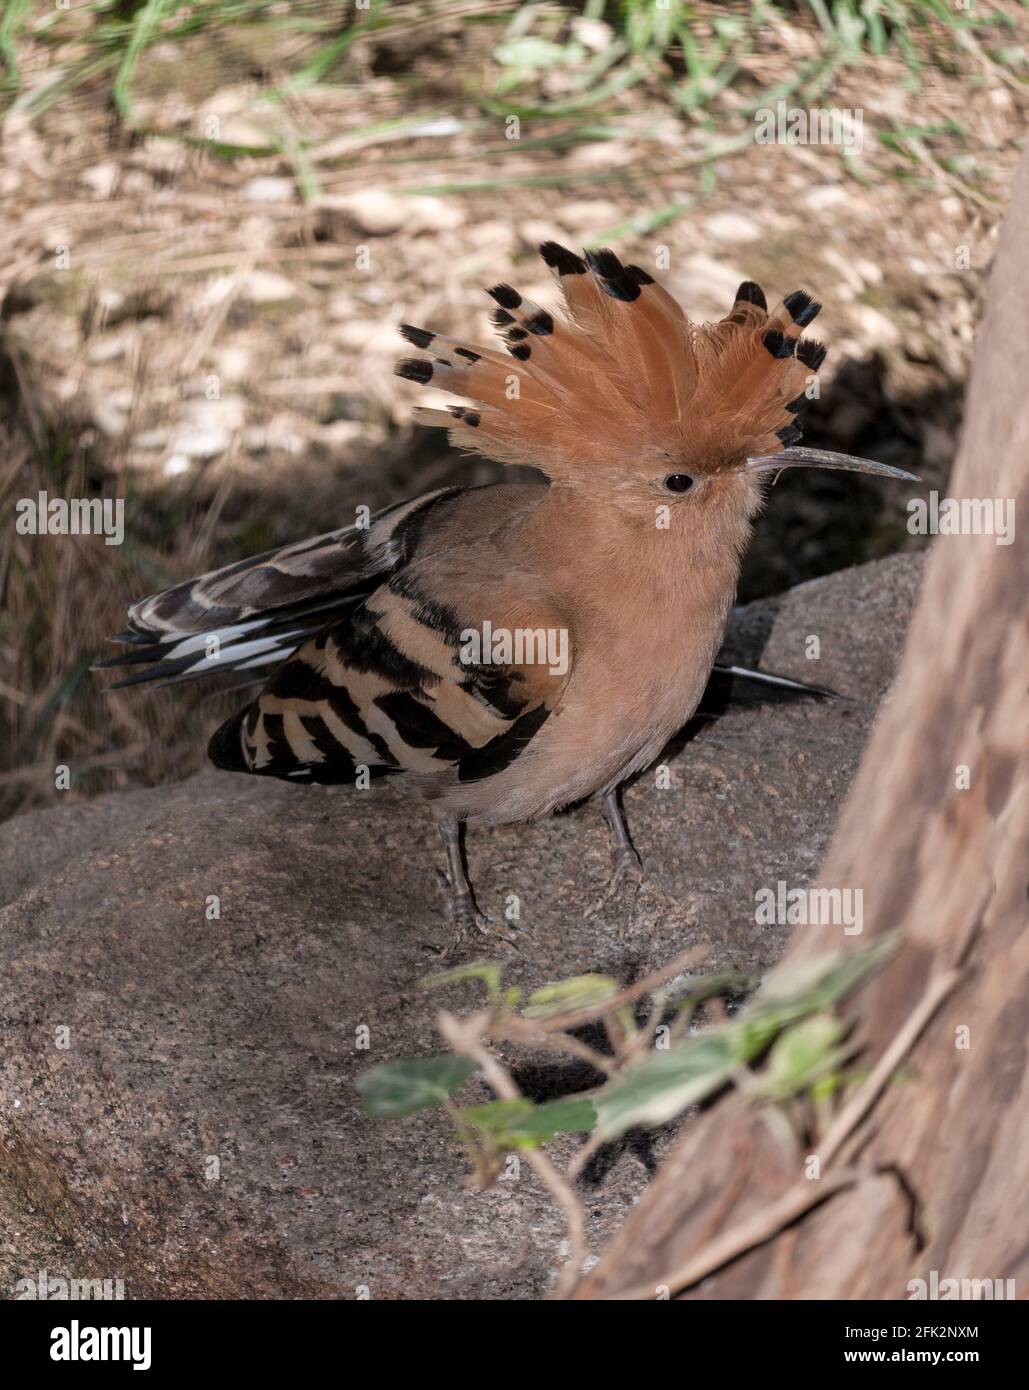 Hoopoe Upupa epops' Adult displaying.Crest raised. South-west France. Stock Photo